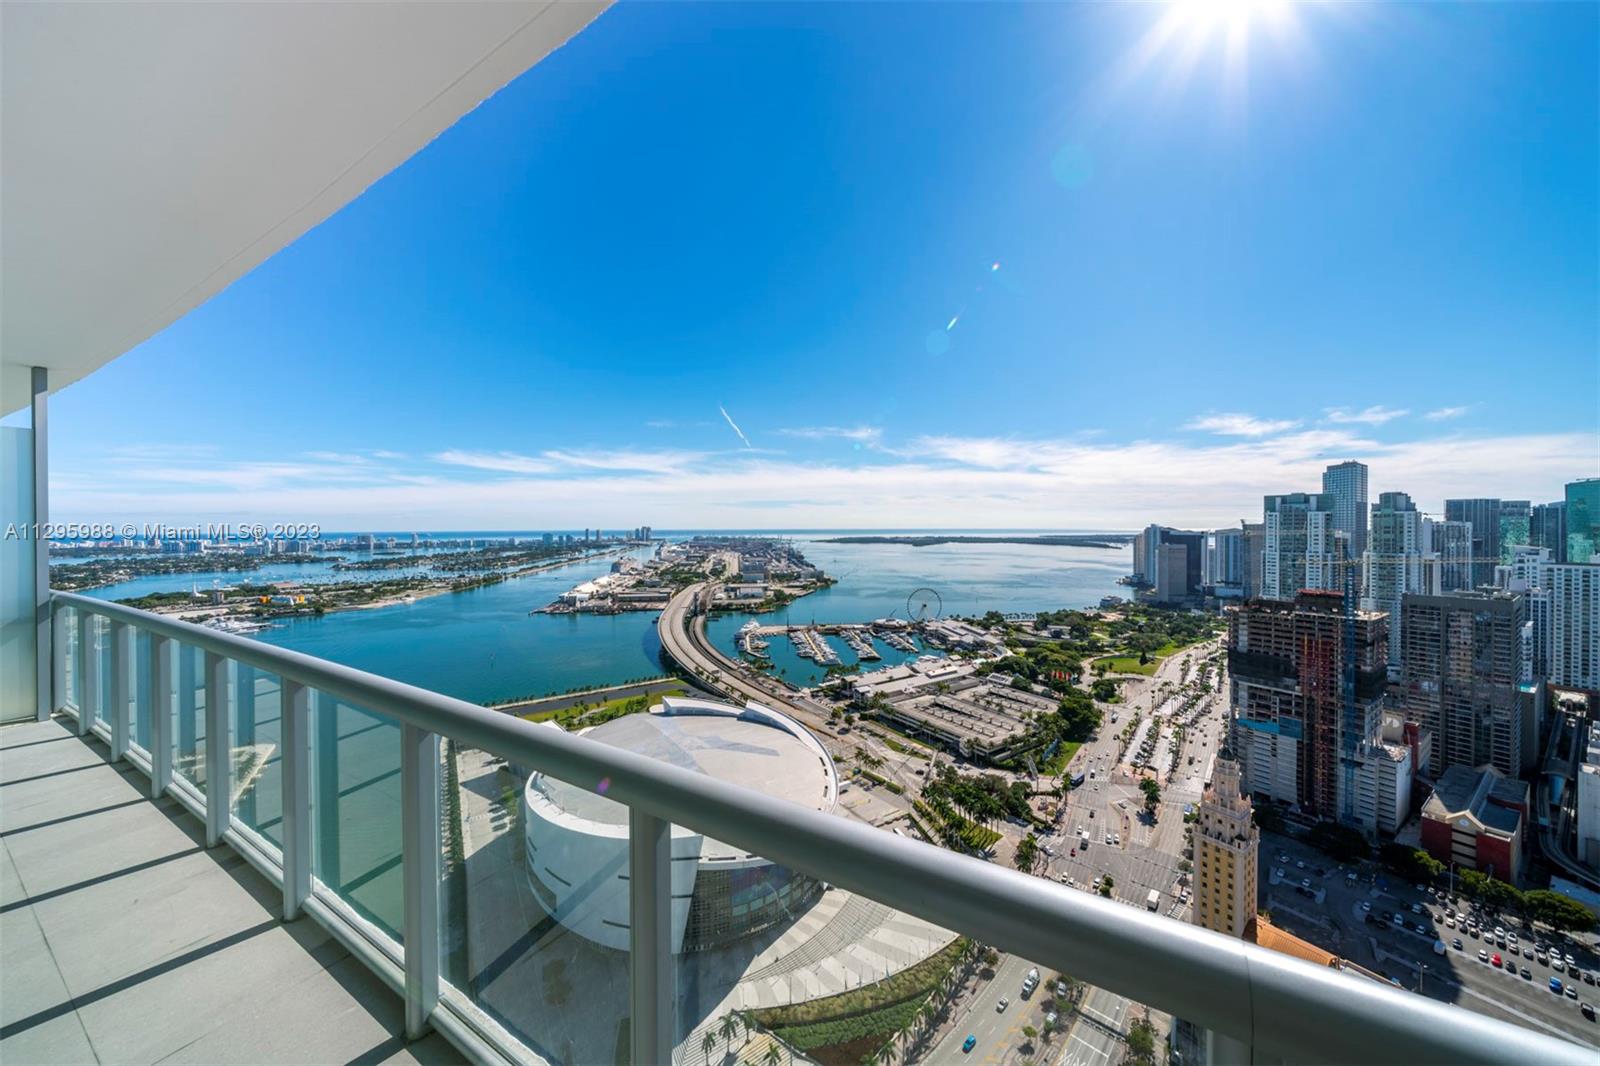 Enjoy breathtaking views of Biscayne Bay & Downtown Miami in this spectacular furnished 1BD/1.5BA located in Marinablue! This spacious layout features hardwood flooring, a built-out walk-in closet, and a sizable balcony that displays captivating views of the bay, ocean, and city. One of Downtown Miami’s most distinguished developments, Marinablue offers luxurious amenities such as two swimming pools with a hot tub, a beach volleyball court, a fitness center, and valet parking. This unbeatable location places you close to highways, grocery stores, nightlife, shopping, and transportation.